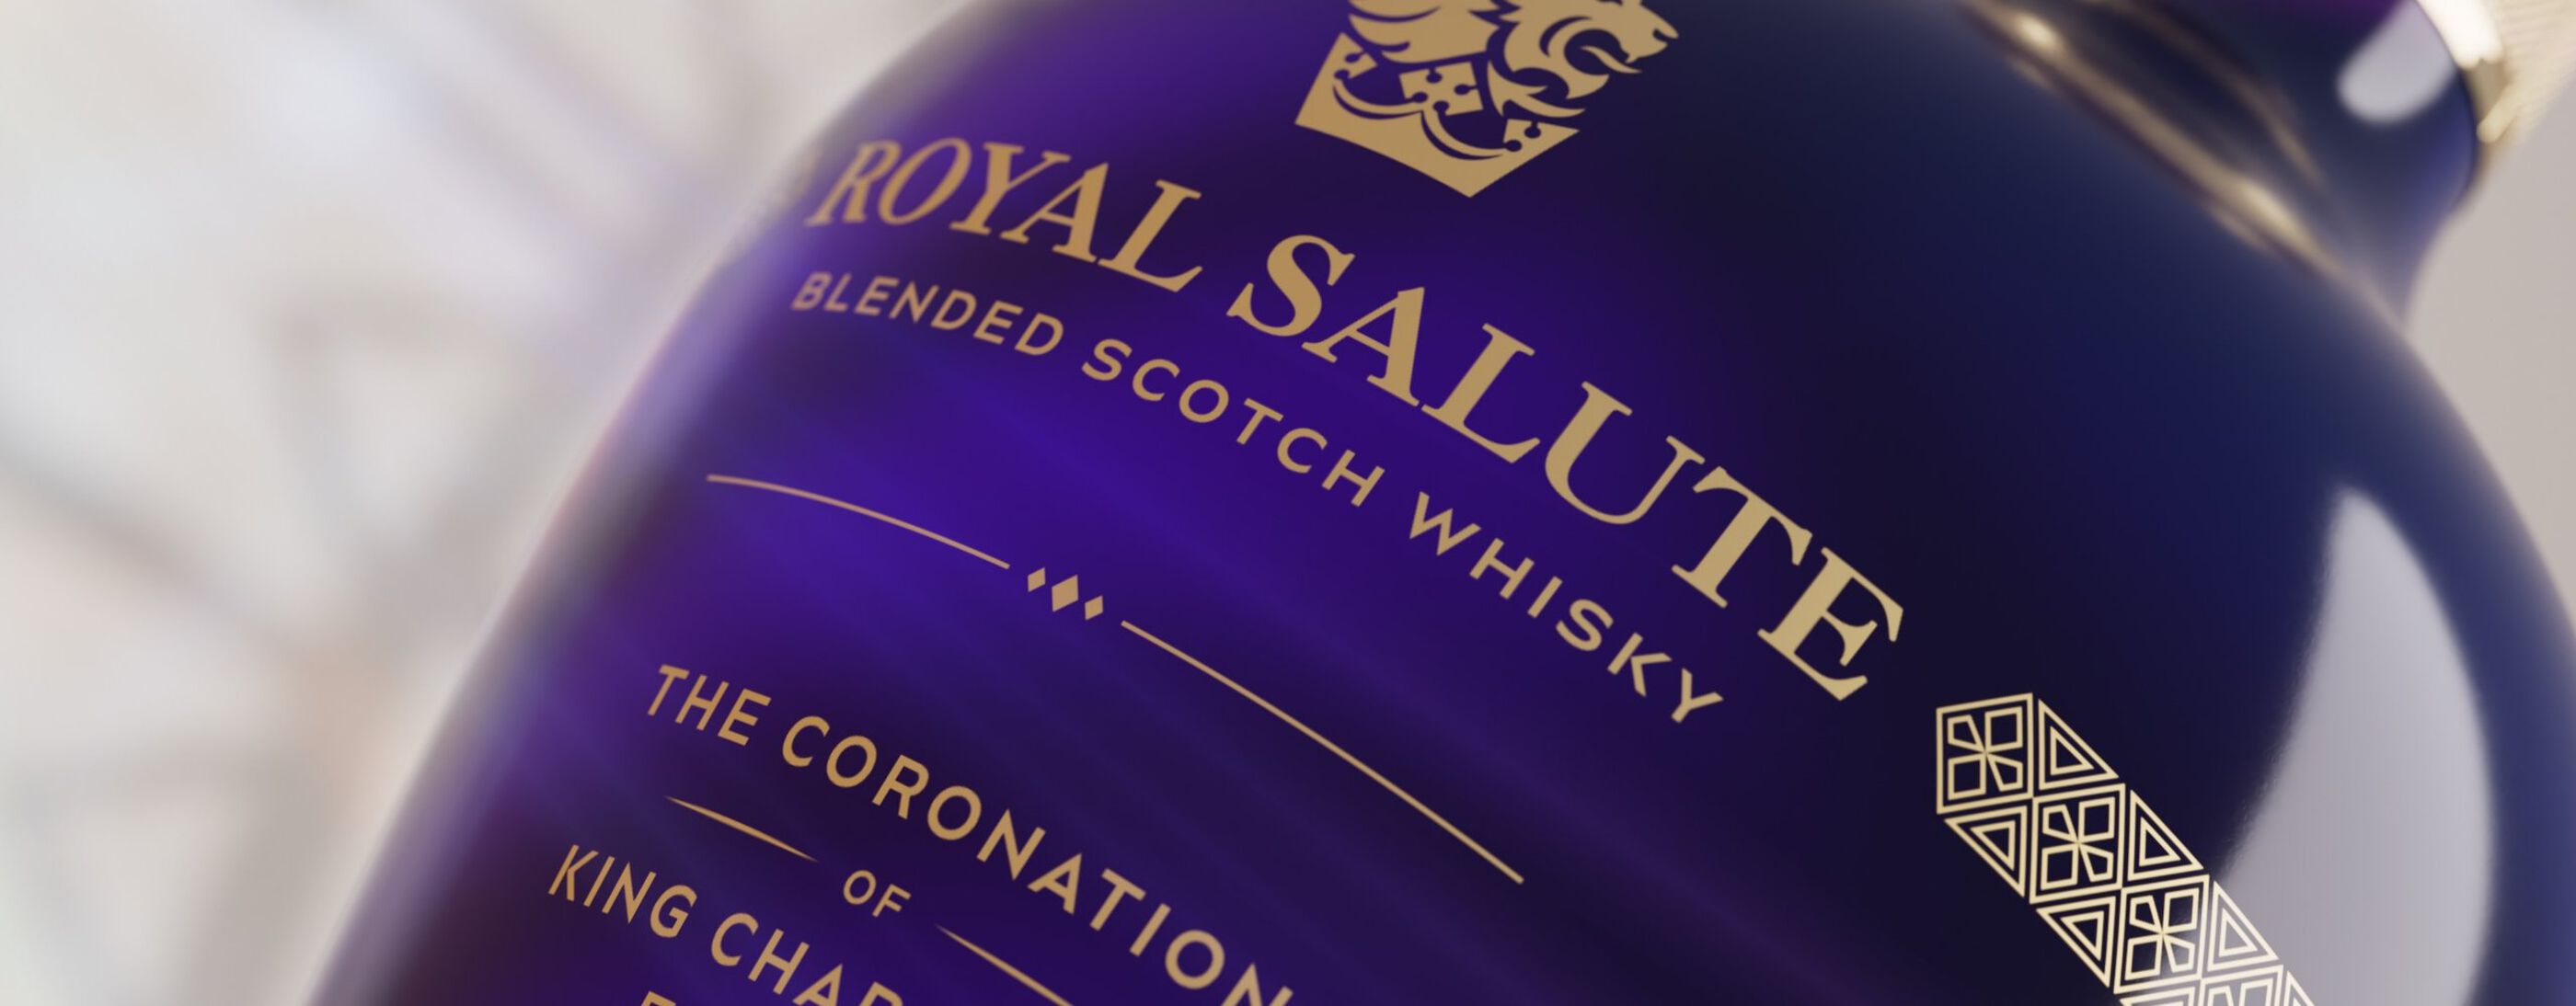 Royal Salute The Coronation of King Charles the third Edition Scotch Whisky